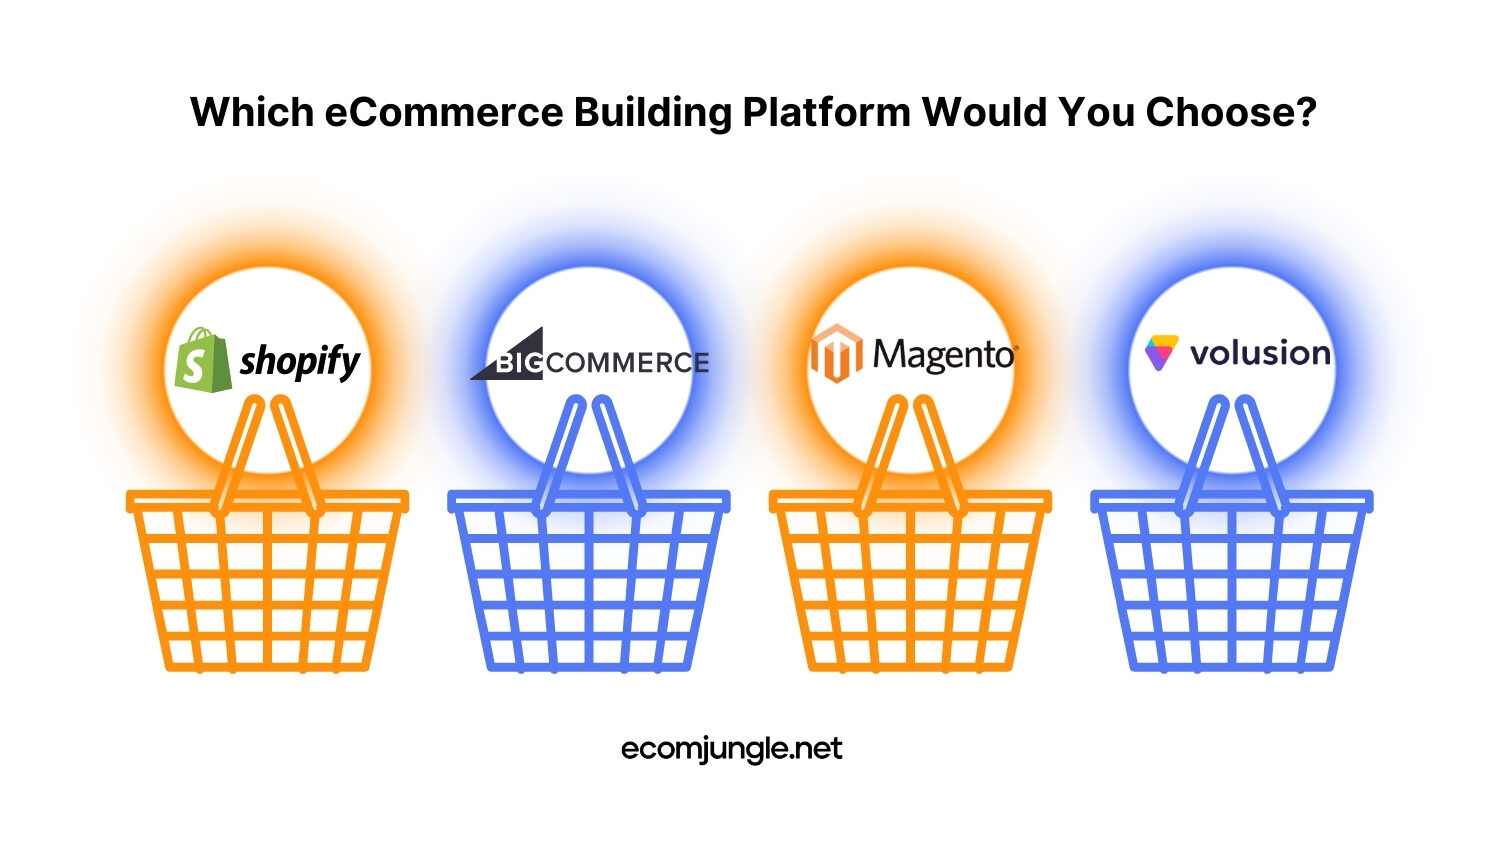 Before you start to build your online store you need to choose ecommerce platform, there are some options, for example, shopify, big commerce and others.